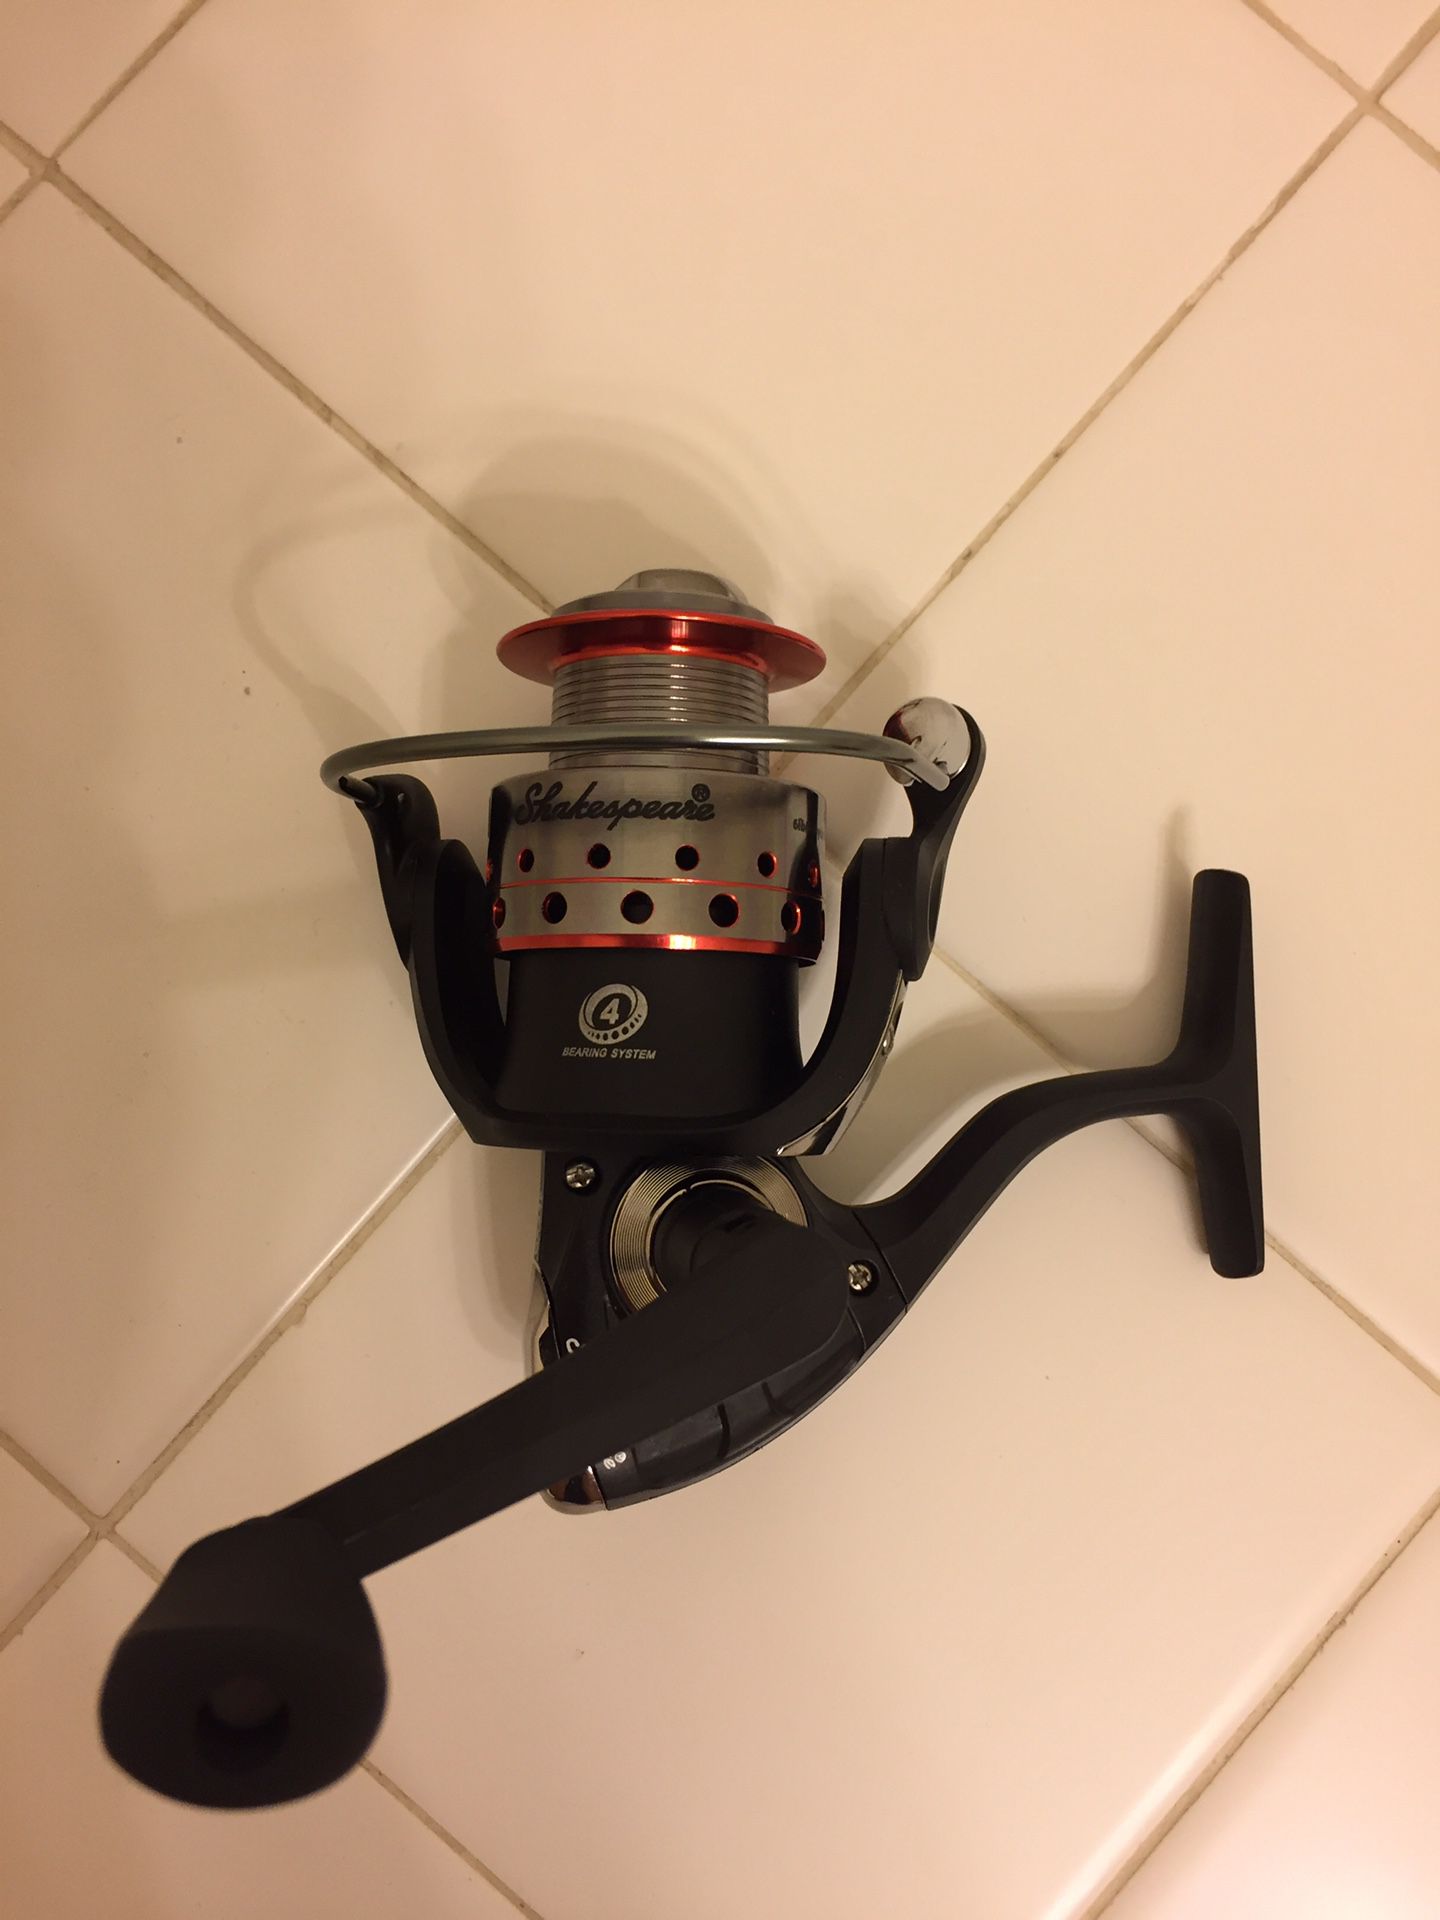 Shakespeare GX235 Spinning Reel for Sale in Gainesville, VA - OfferUp